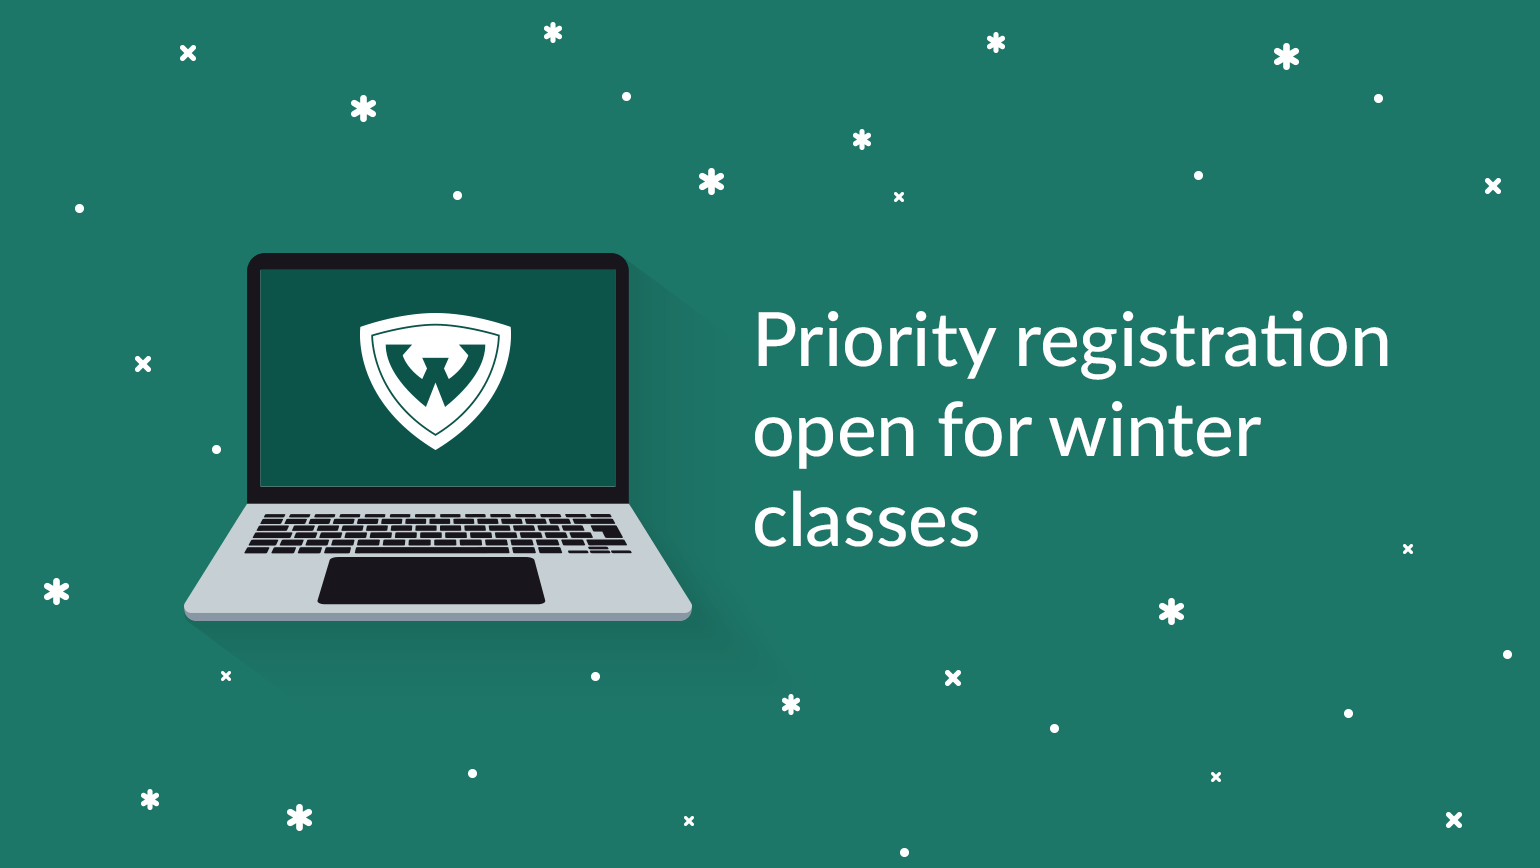 Students encouraged to plan ahead for winter 2021 registration, financial aid